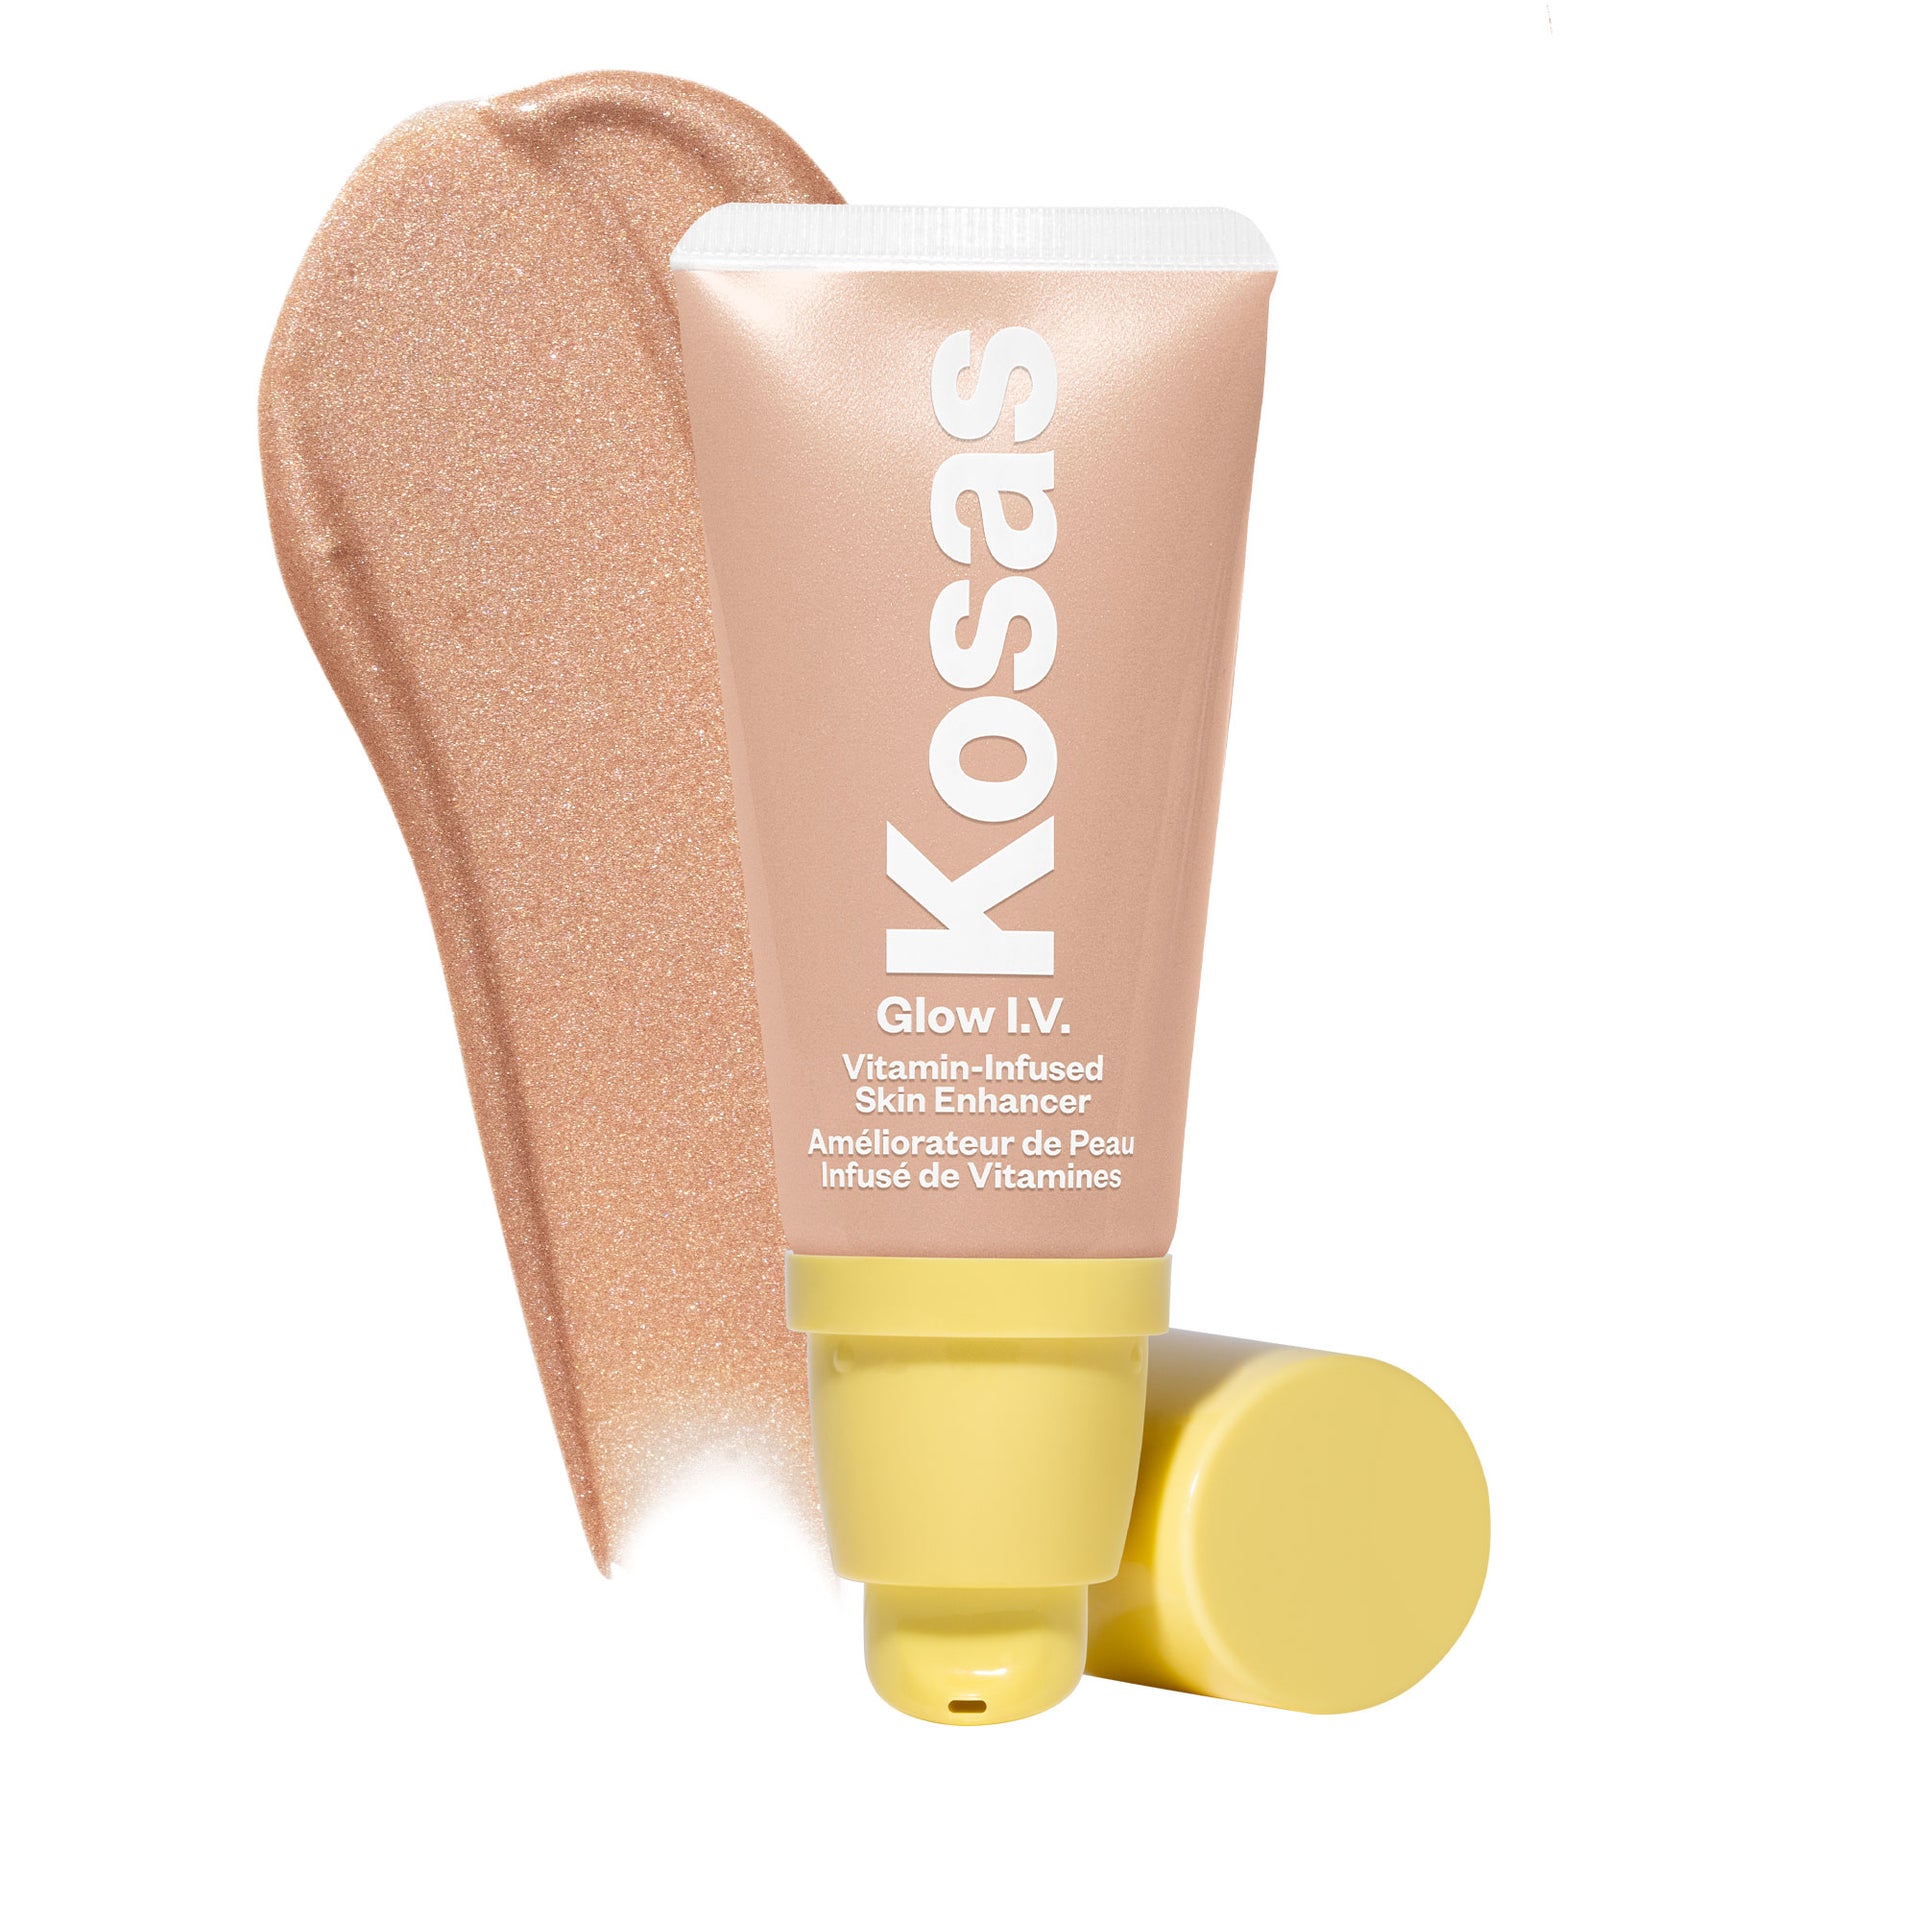 An image of the Kosas Glow IV in the shade Illuminate